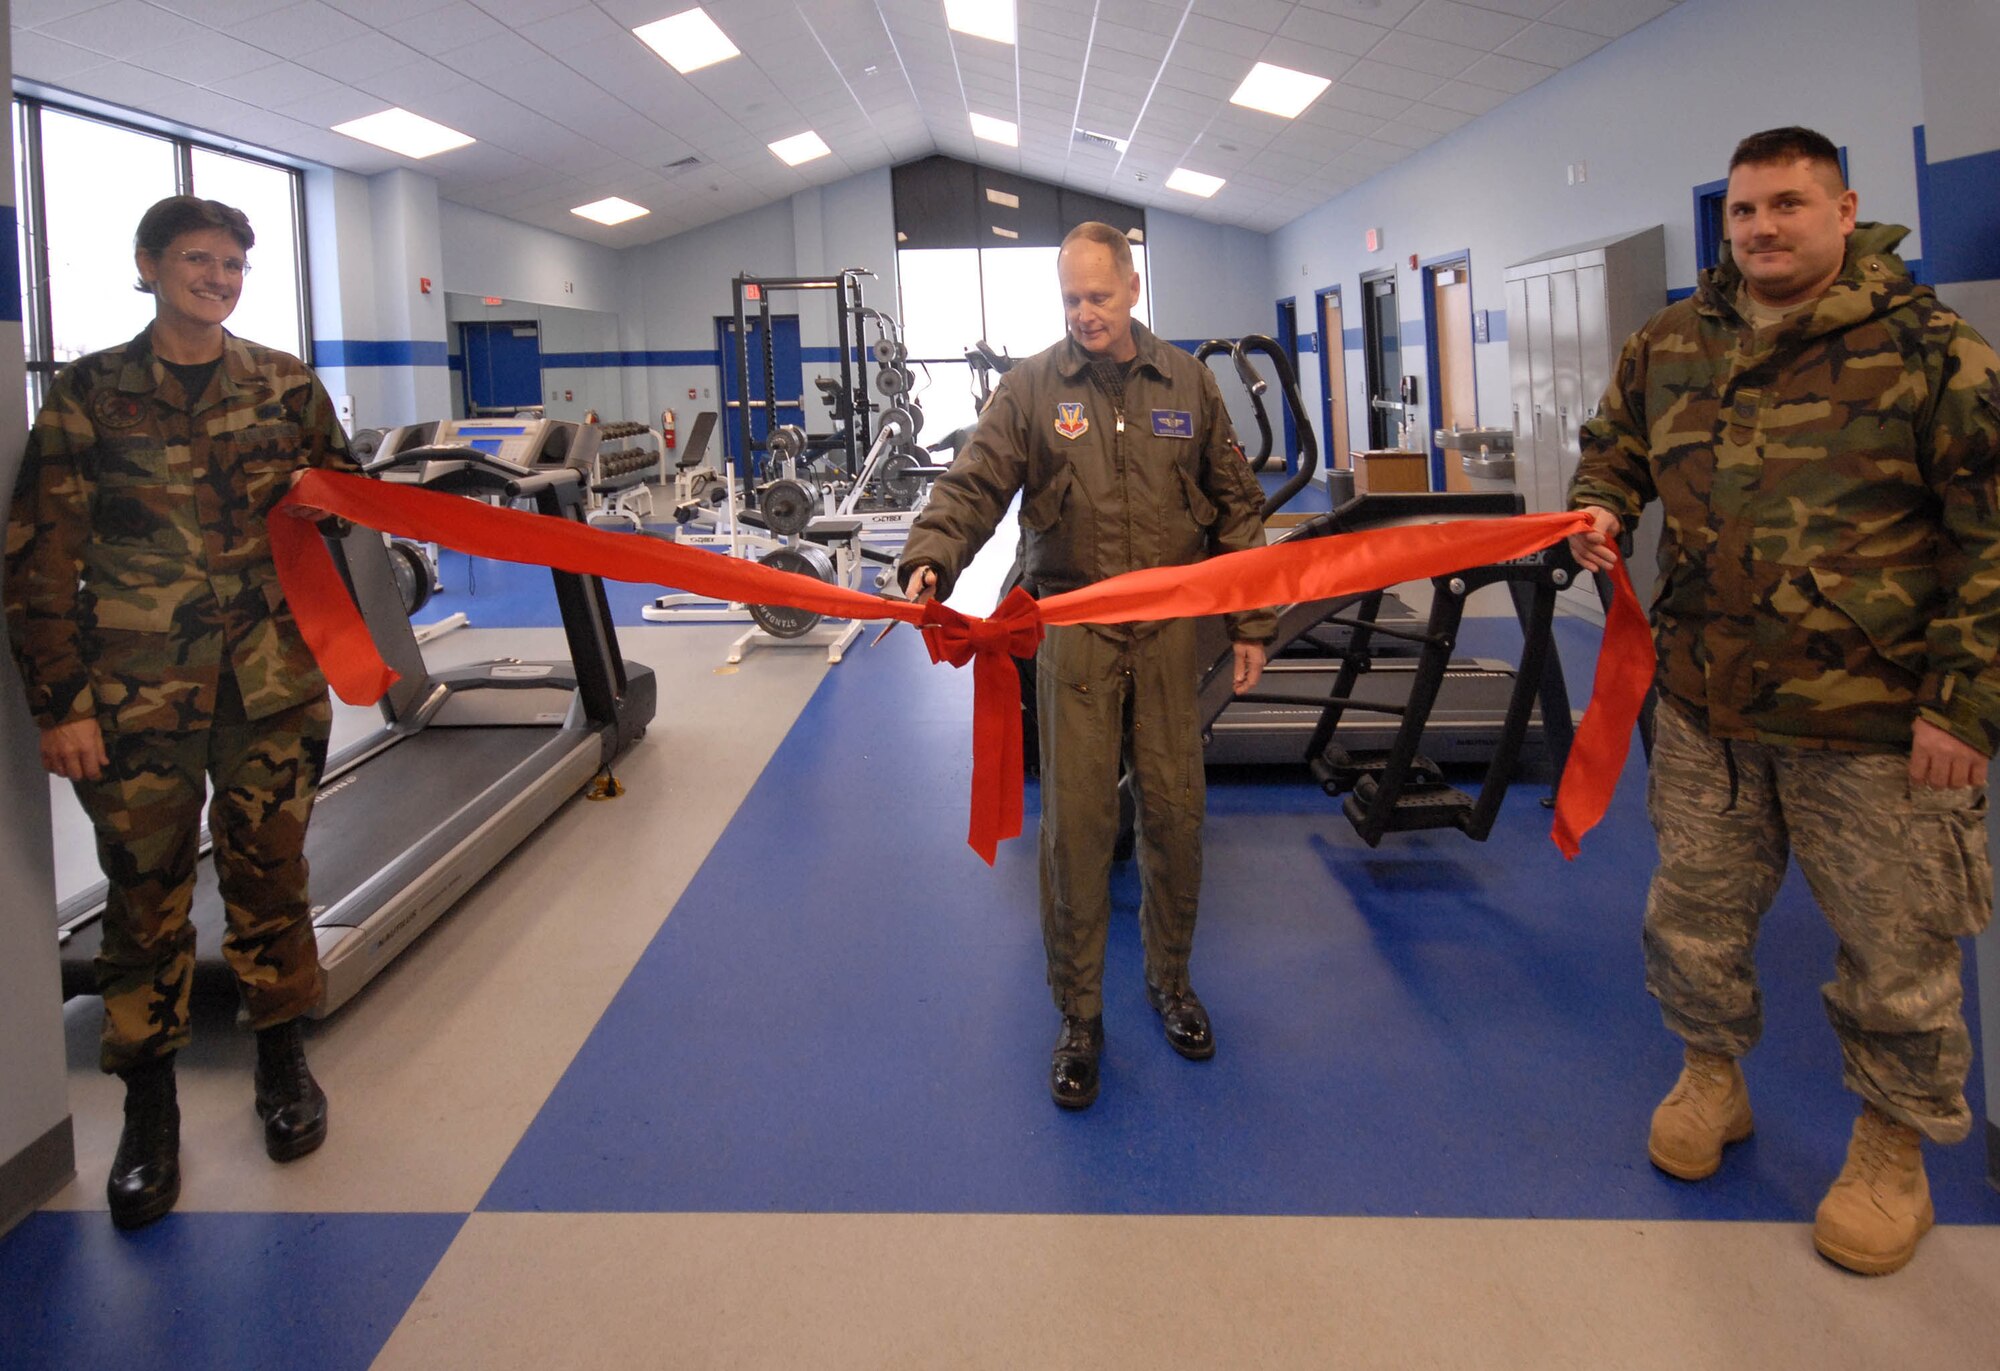 Master Sgt. Carmen LaGuardia, left, and Tech. Sgt. Craig Madden, right , holds the ribbon as Col. Rodger Seidel prepares to cut it during opening ceremonies for the new base gym Friday, Dec, 4, 2009.  The new facility feature more equipment for airman to prepare for the new Air force fitness requirements. (Photo by Master Sgt. Dale Atkins)